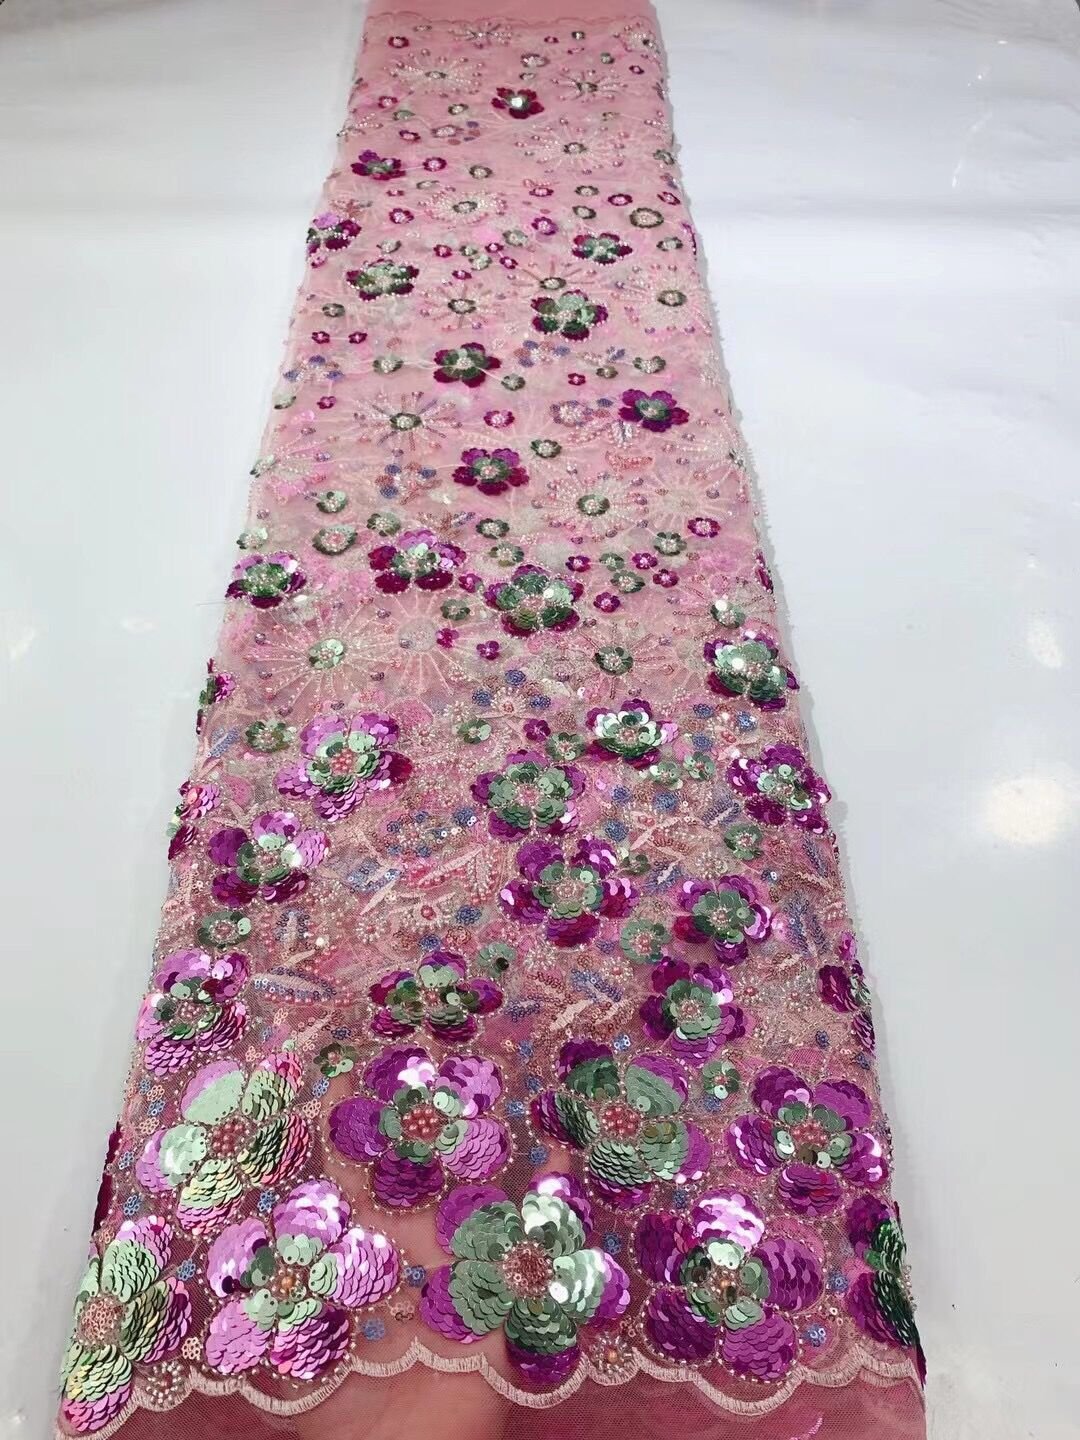 5 YARDS / 12 COLORS / Rochelle Floral Beaded Embroidery Glitter Mesh Lace  Party Prom Bridal Dress Fabric